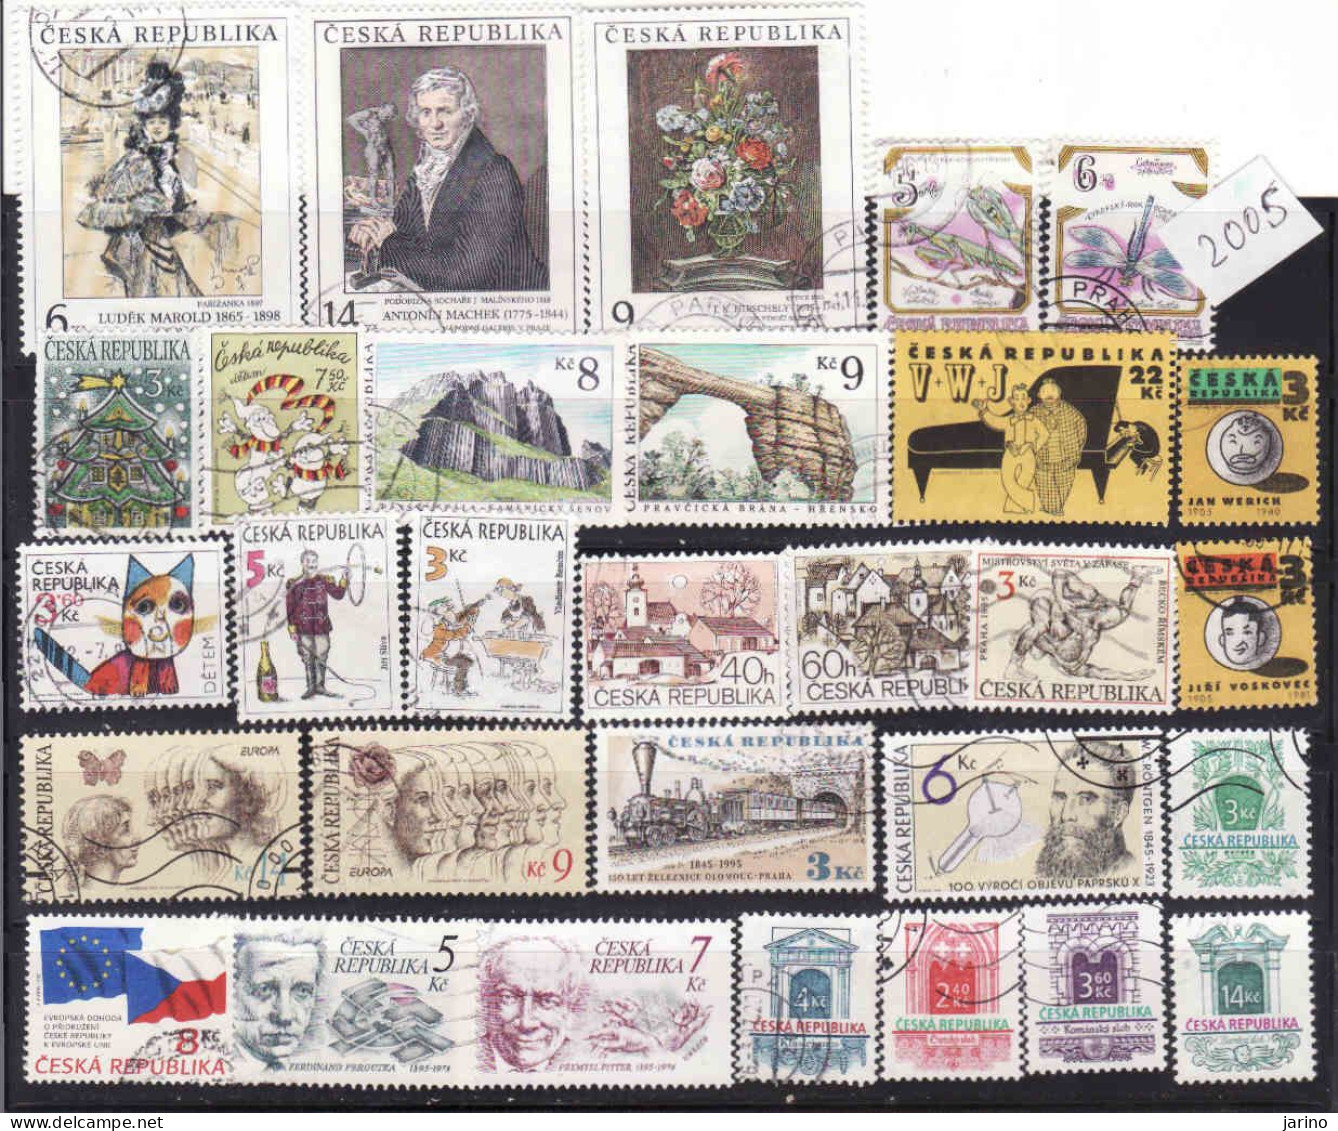 Czech Republic 1995, Used,I Will Complete Your Wantlist Of Czech Or Slovak Stamps According To The Michel Catalog. - Used Stamps